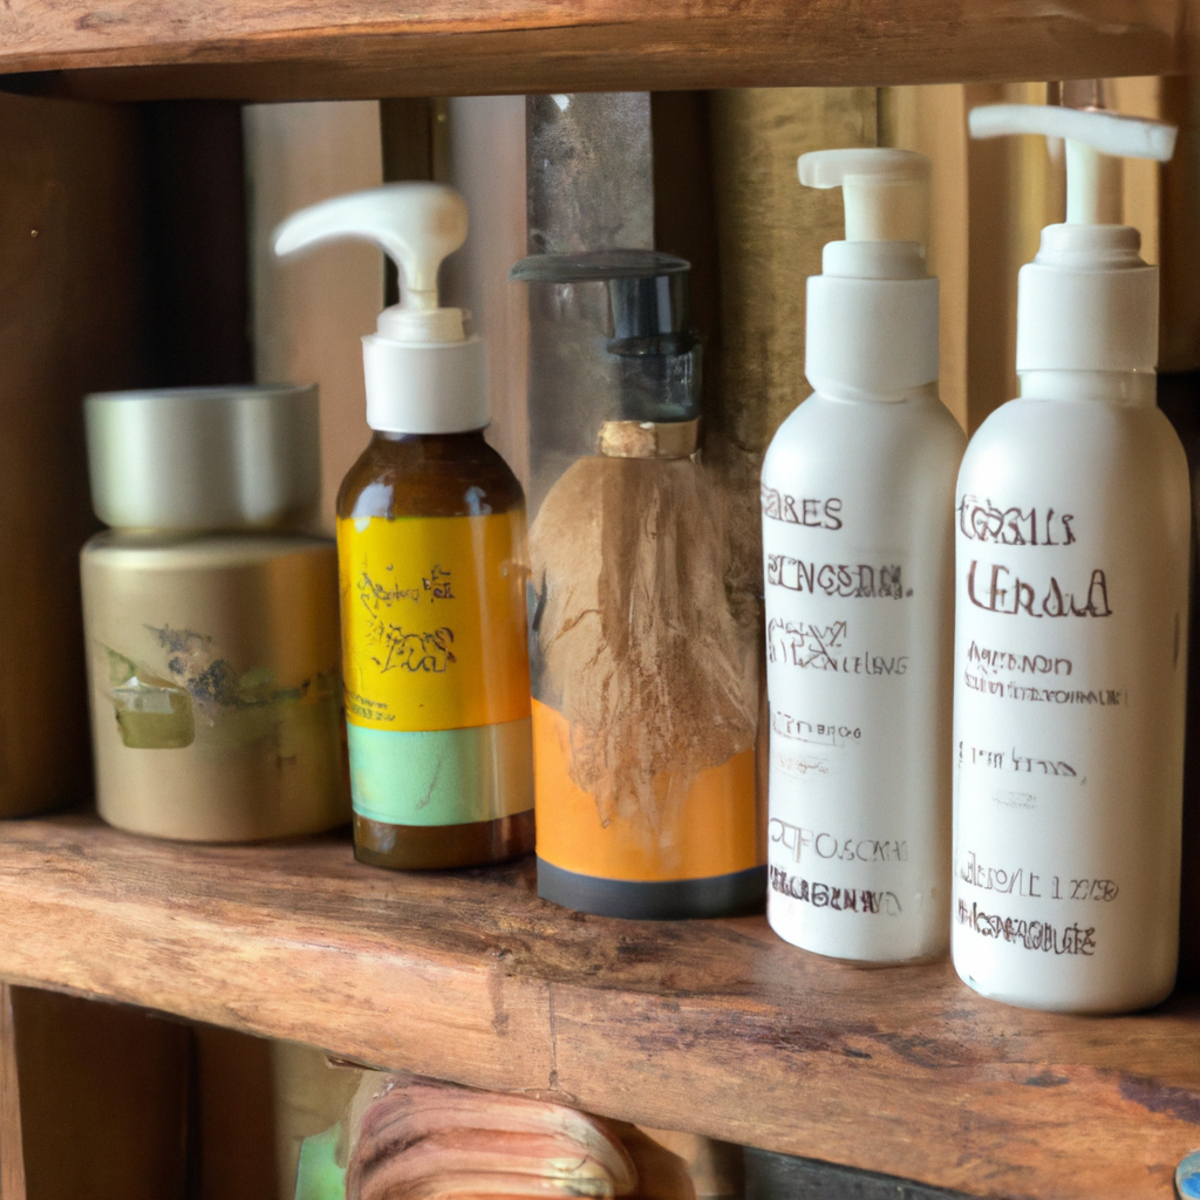 Organic hair care products on wooden shelf, emphasizing natural ingredients, safety, and vibrant packaging. Clean and inviting aesthetic.